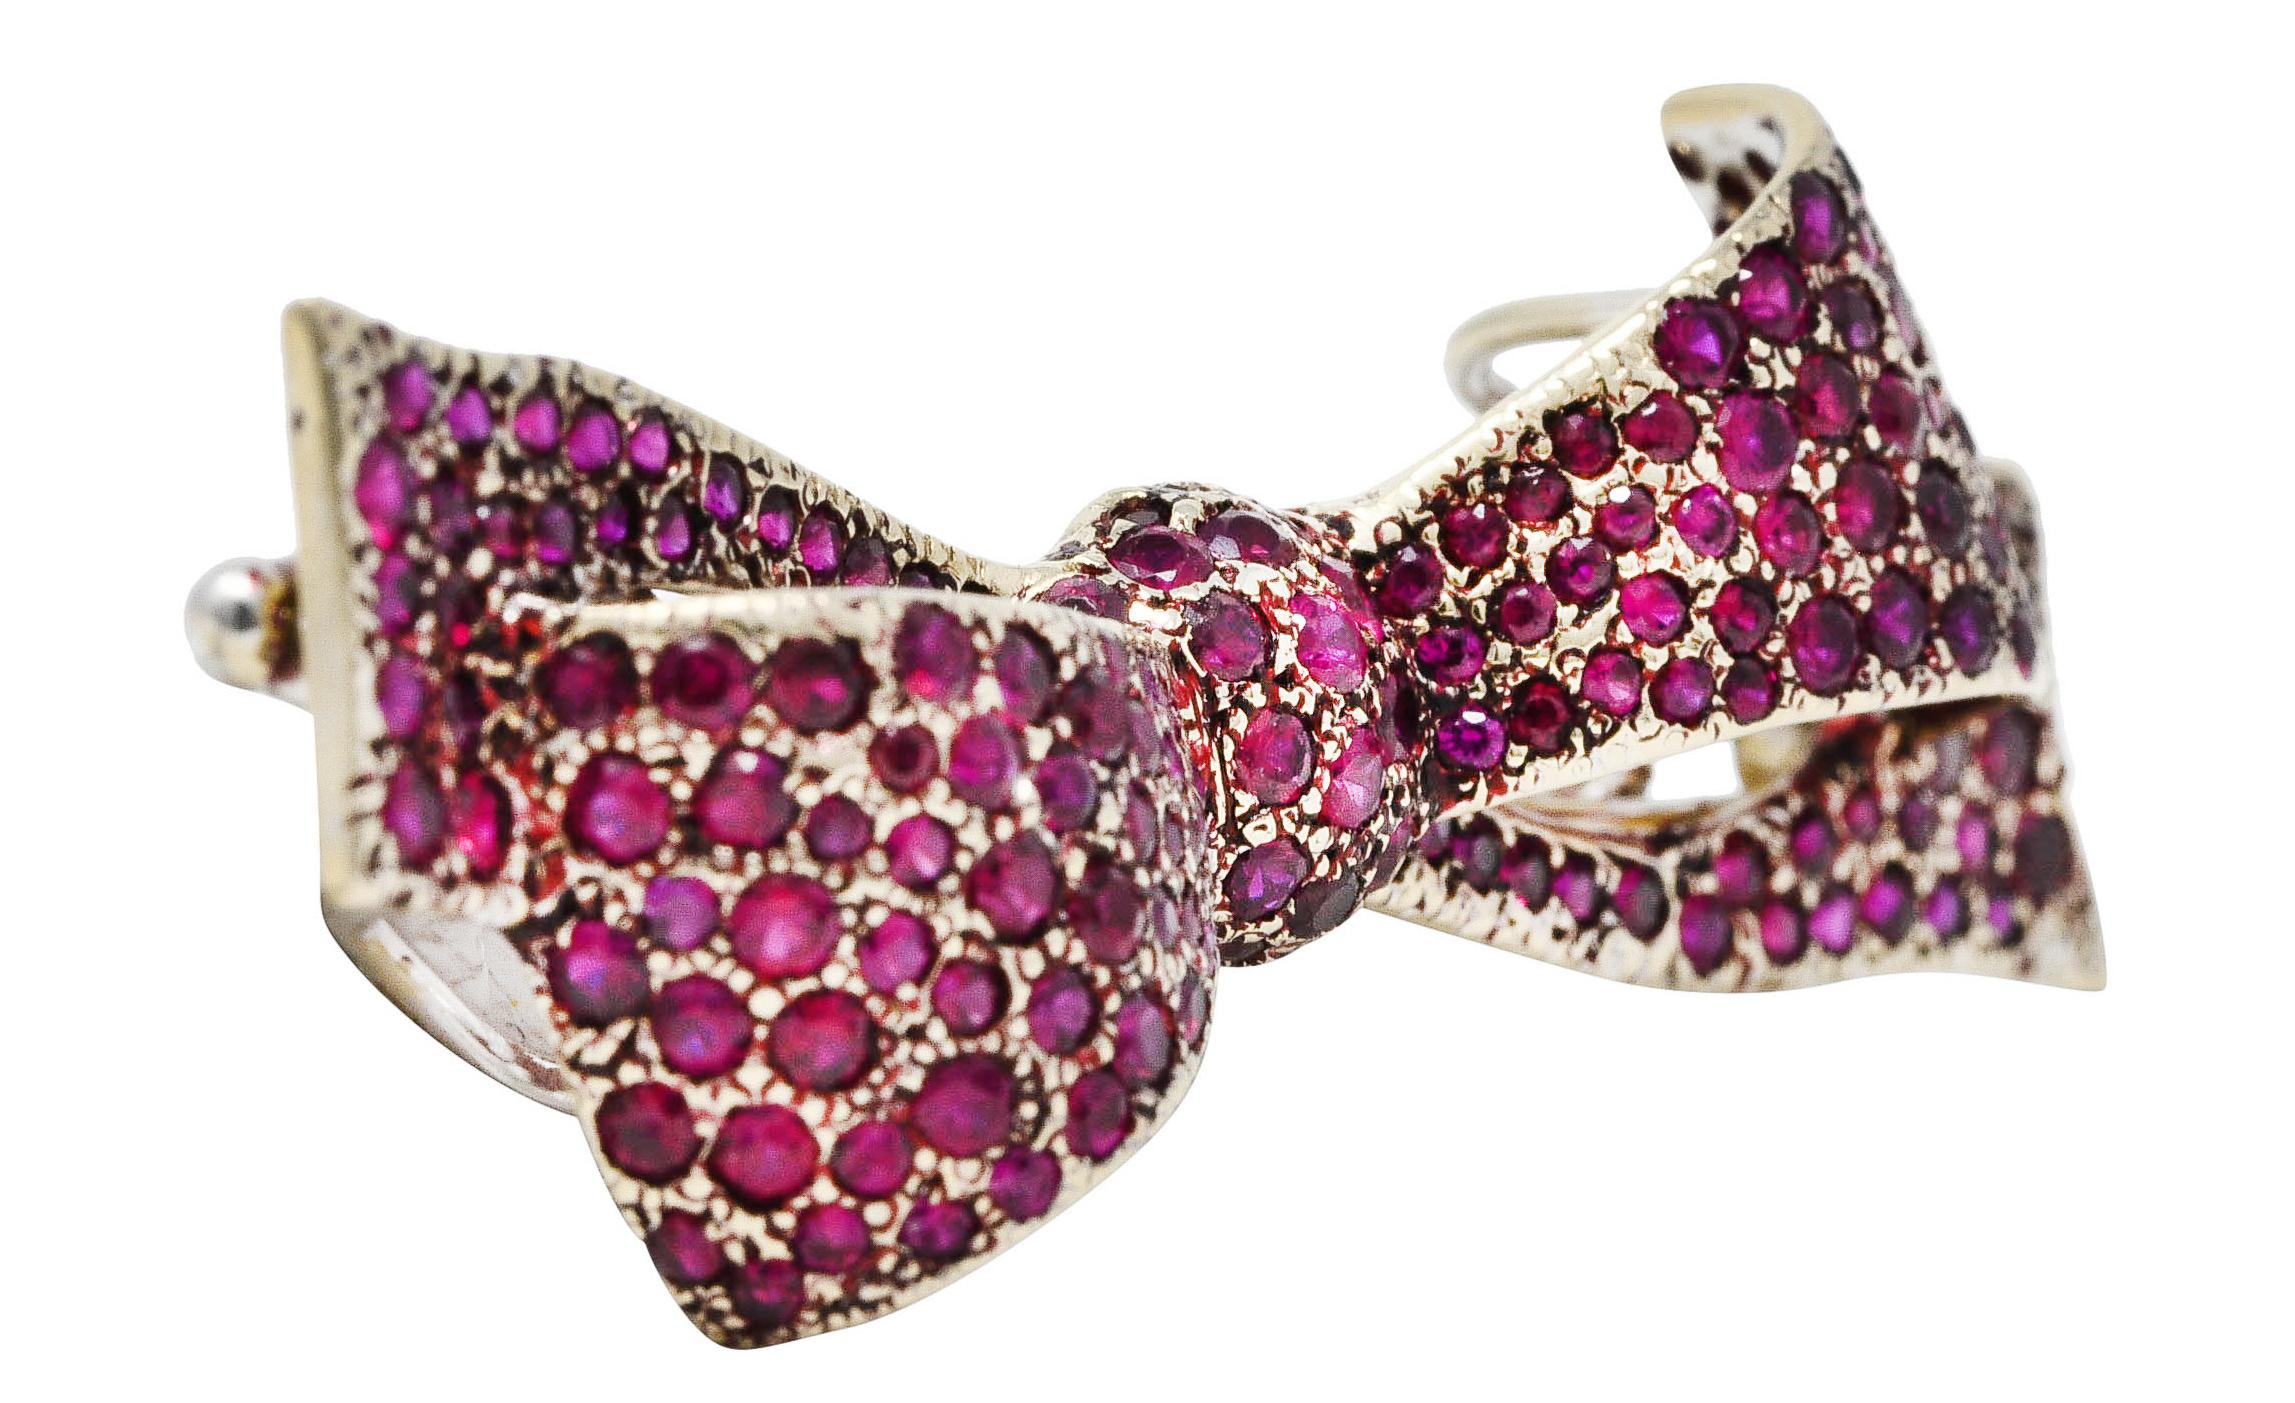 Pendant brooch is dynamically formed as a ribboned bow - oriented East to West. Pavè set throughout by round cut rubies weighing in total approximately 5.00 carats. Very well matched in vivid strongly purplish red color with medium saturation. Pavè